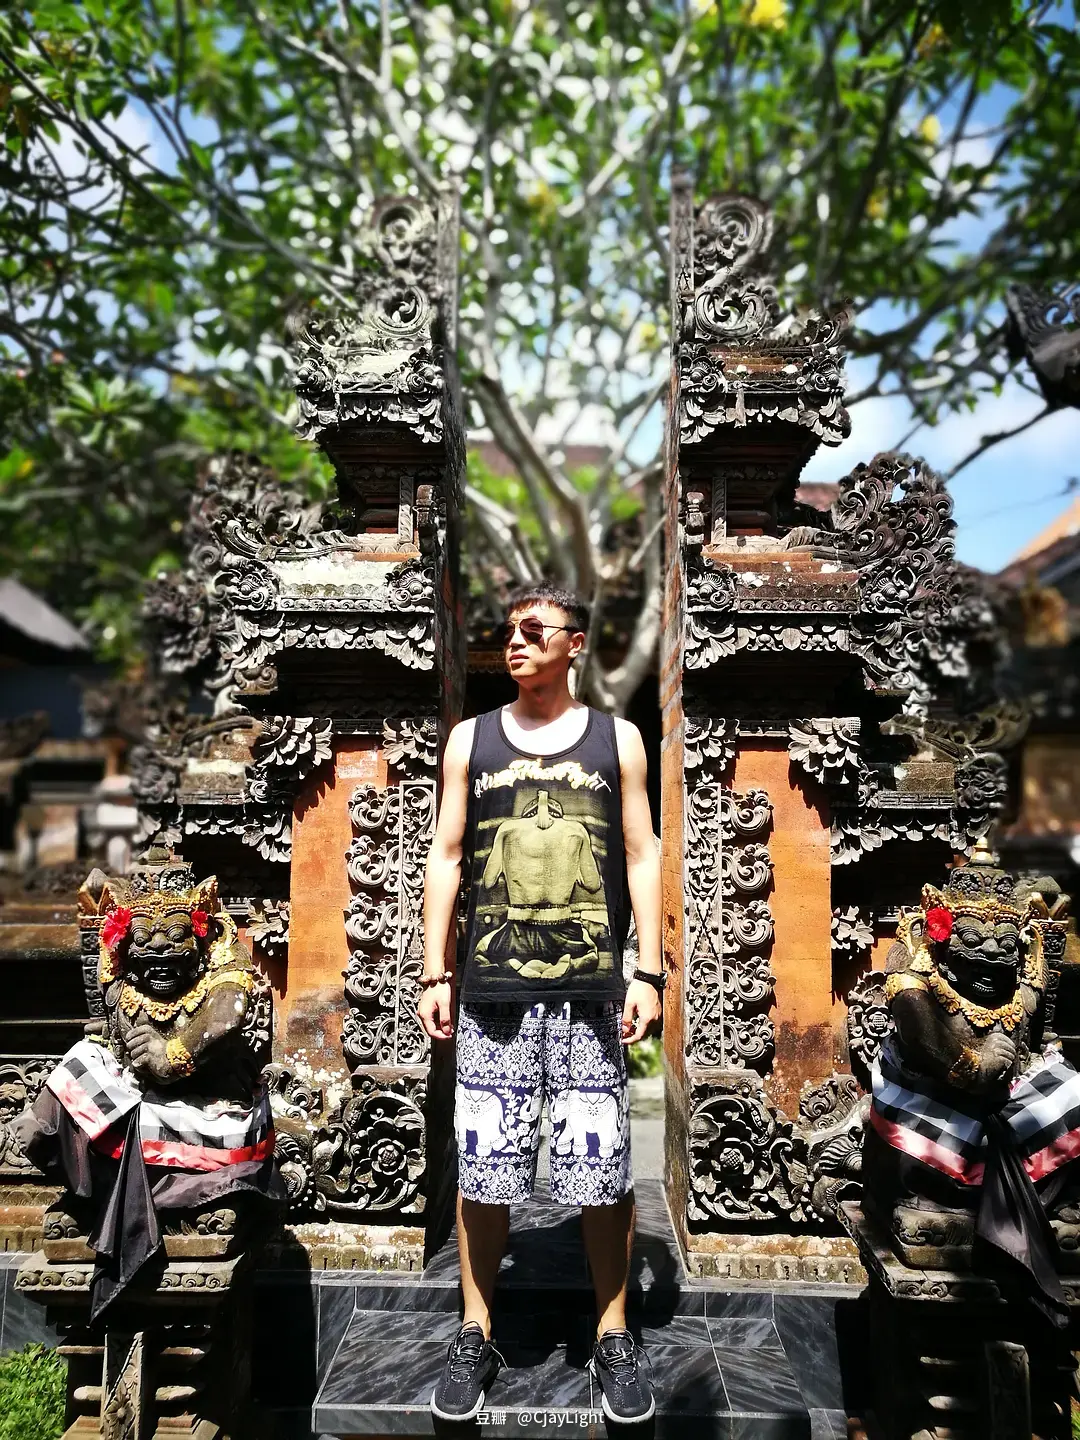 Bali-The ultimate experience of Indonesia’s active volcanoes, art and leisure in Bali